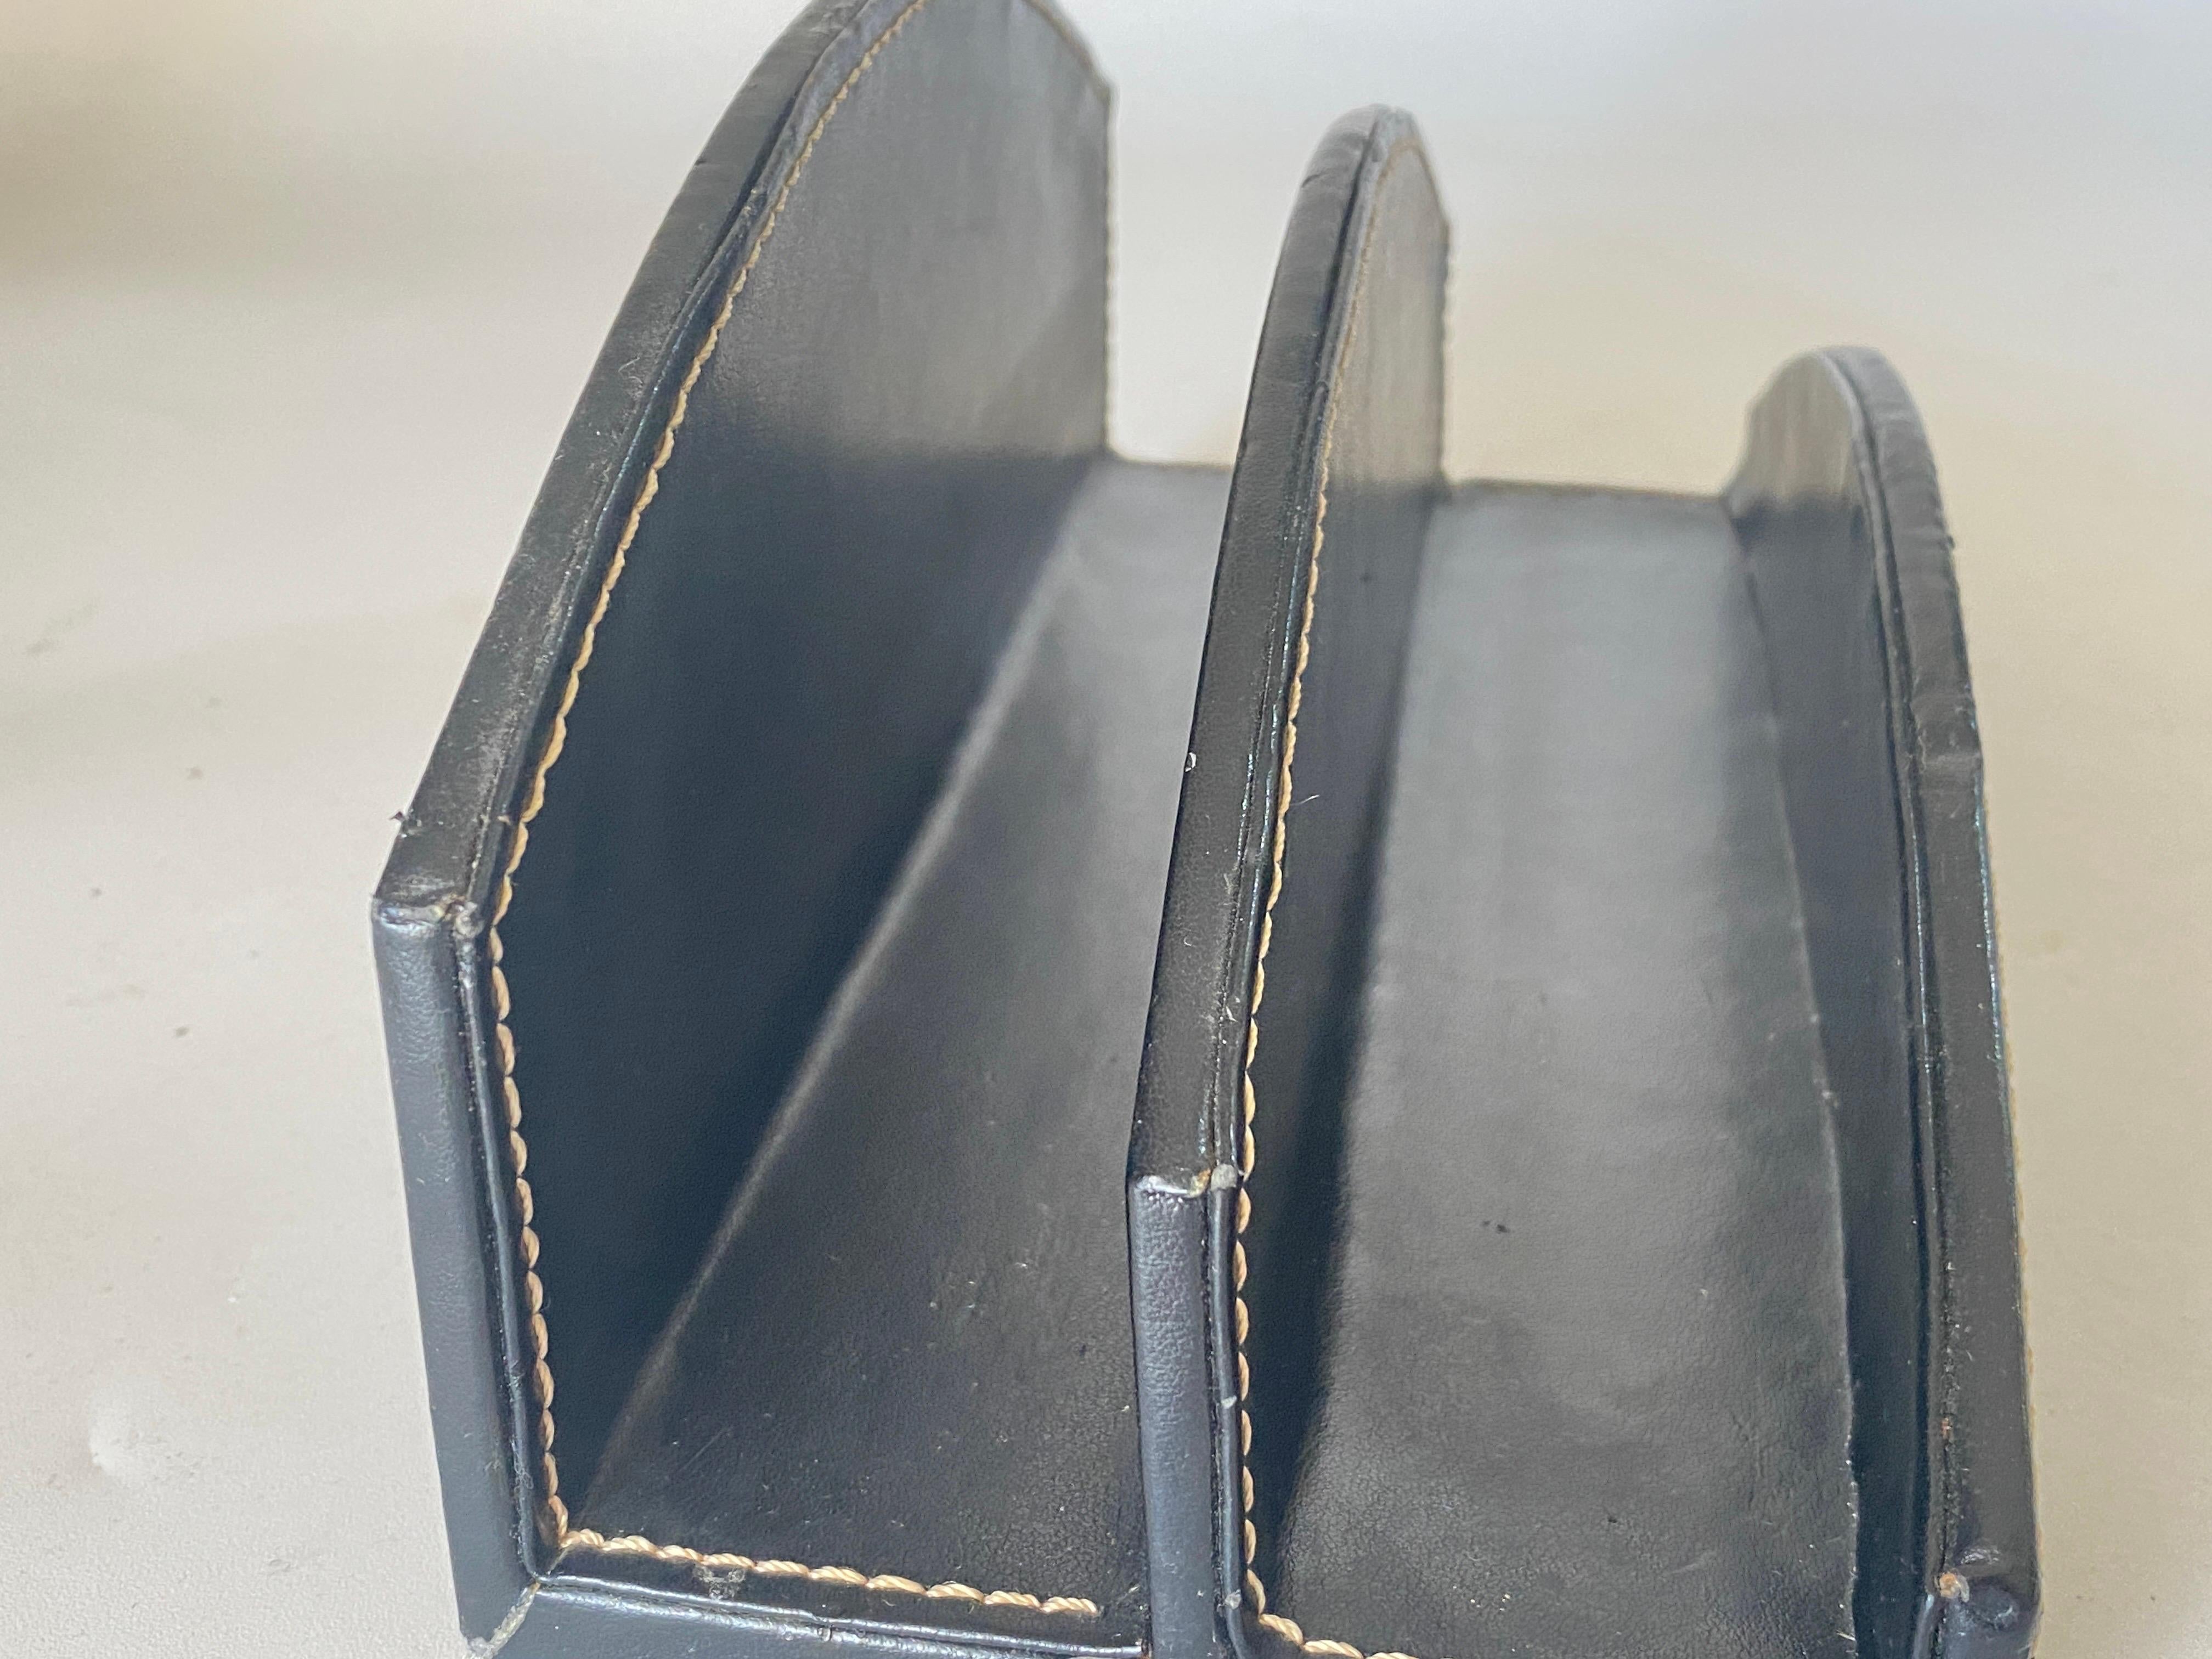 Handsome saddle leather letter holder by Jacques Adnet. Signature contrast stitching. Great patina to leather. Excellent vintage condition. Paris, in the traditions of French big houses like Lancel or Dior.